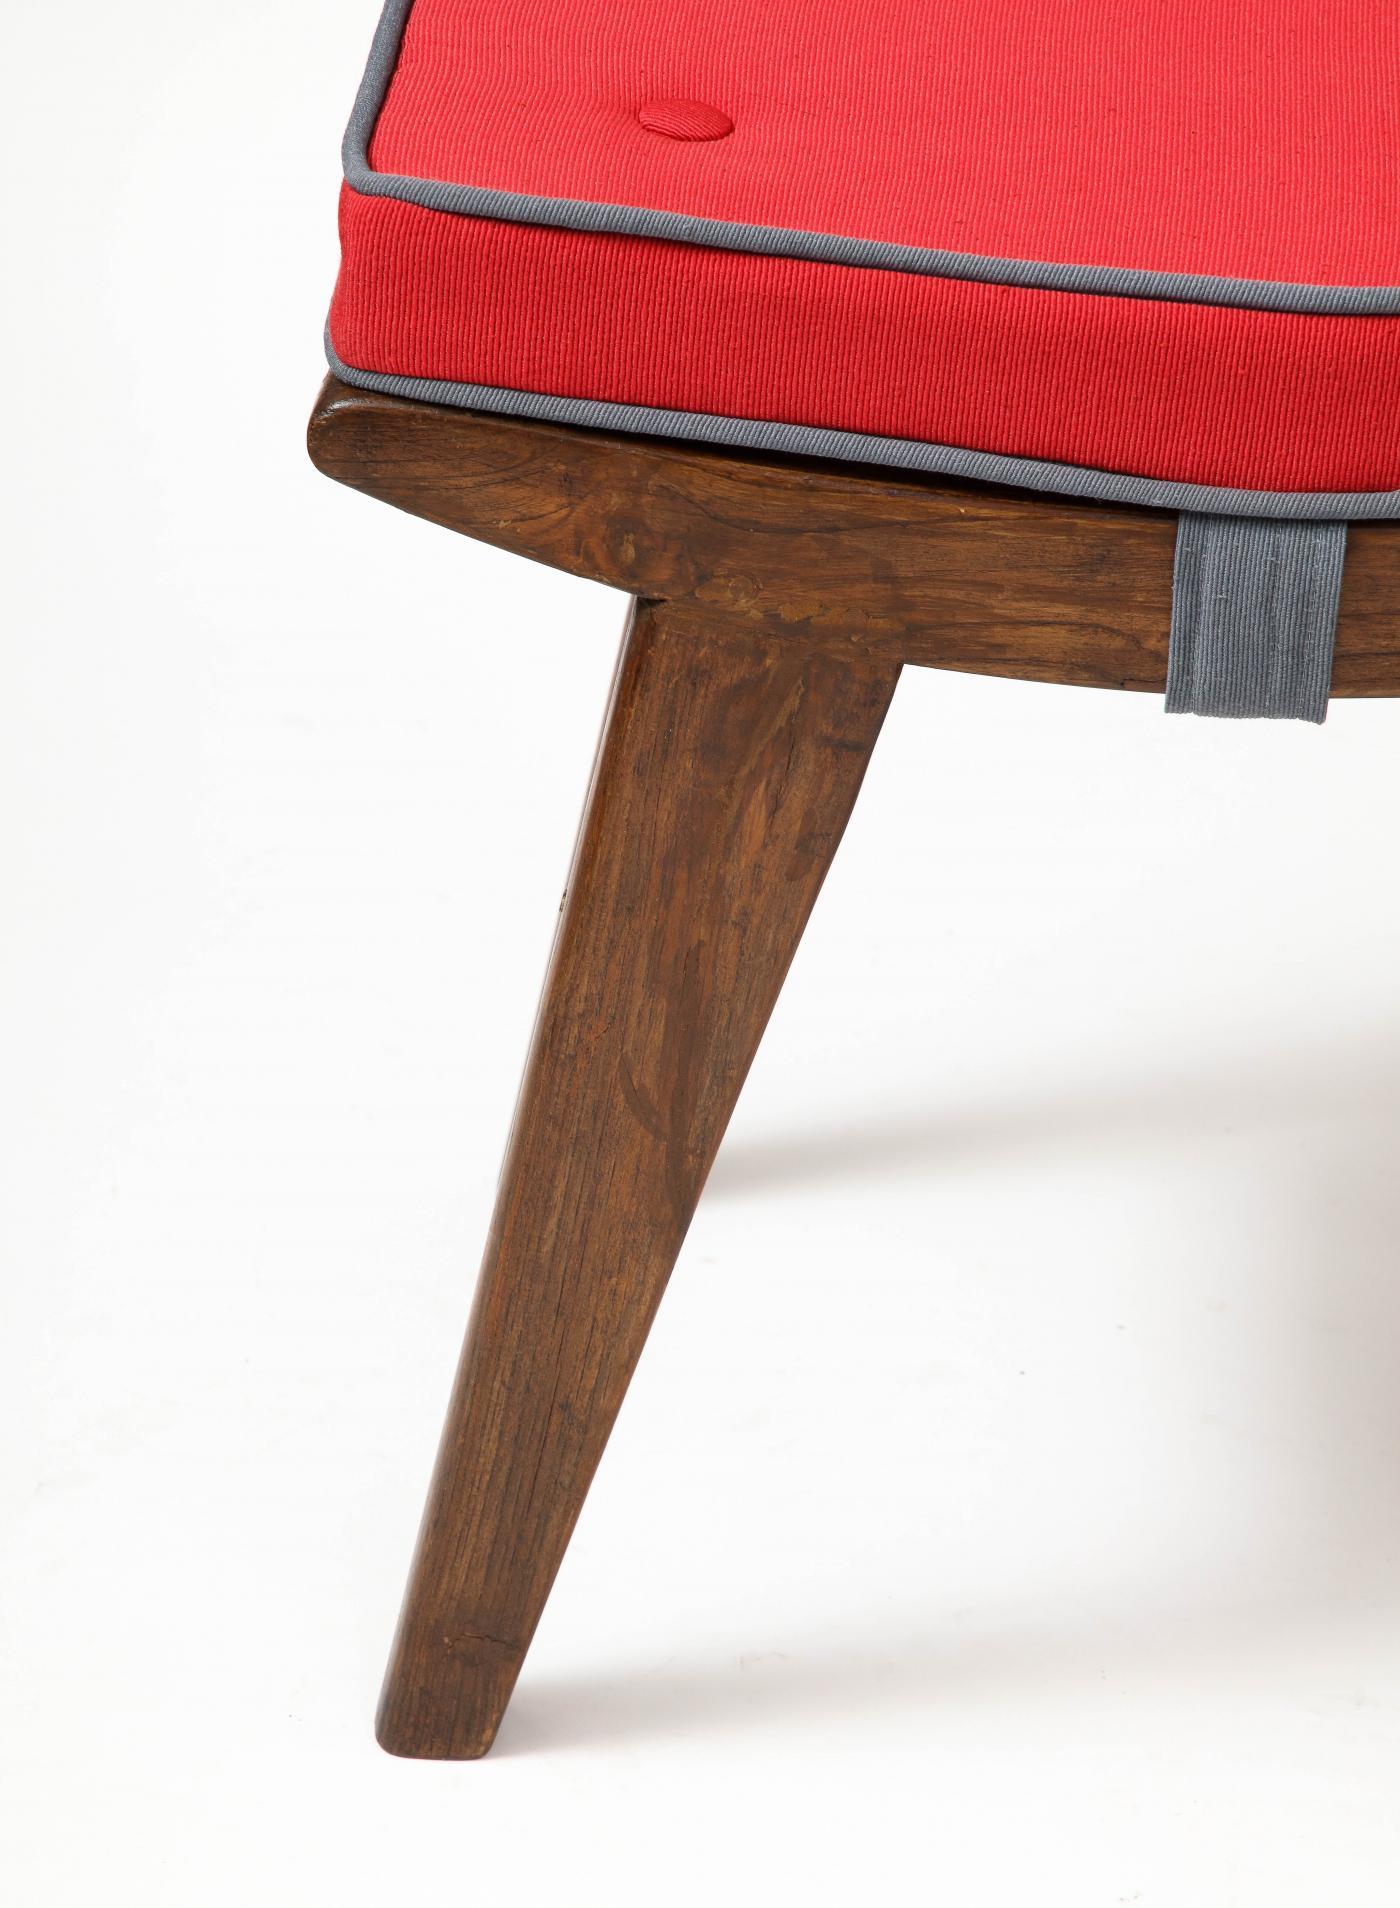 Stool in Teak, Cane and Upholstery by Pierre Jeanneret, Chandigarh, c. 1959 For Sale 5